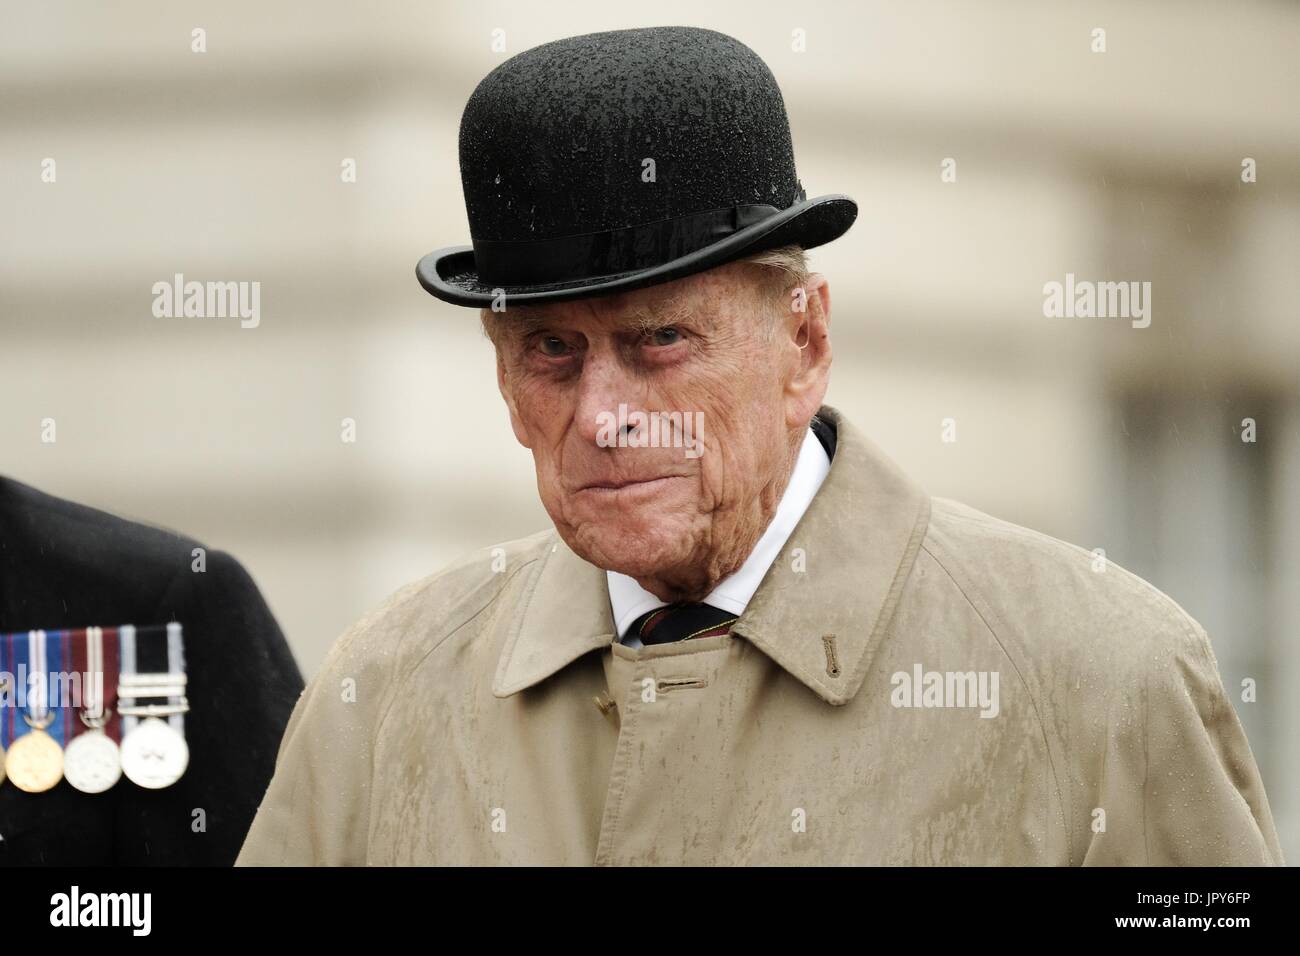 London, UK. 2nd August, 2017. London, Royal Marines' Captain General for the last time at Buckingham Palace in London. 2nd Aug, 2017. Britain's Prince Philip, Duke of Edinburgh, reacts as he attends a parade in the role of Royal Marines' Captain General for the last time at Buckingham Palace in London, Britain on Aug. 2, 2017. Prince Philip, husband of Queen Elizabeth II, carries out his final solo public engagement Wednesday before he retires from royal duties. Credit: Pool/Xinhua/Alamy Live News Stock Photo